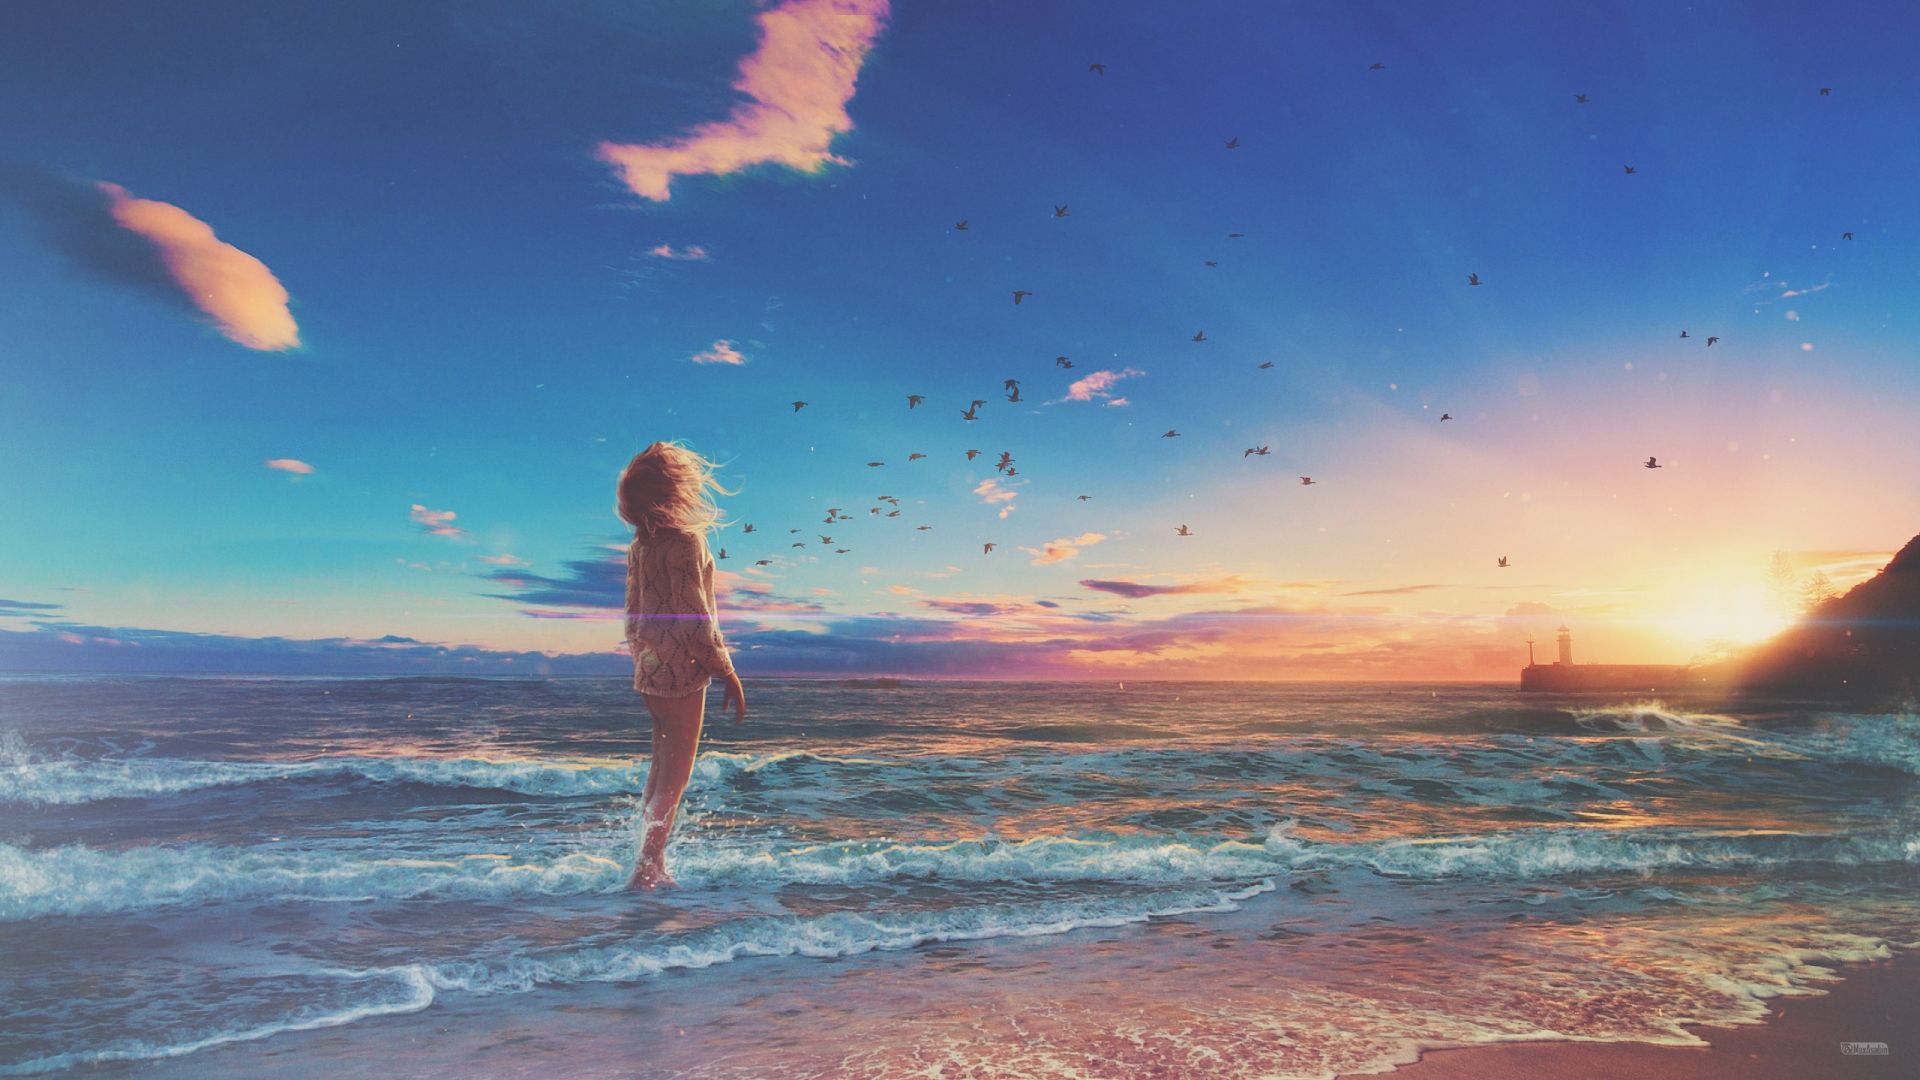 Desktop Wallpaper Girl At Beach, Sunset, Anime, Hd Image, Picture, Background, 6dfqnx